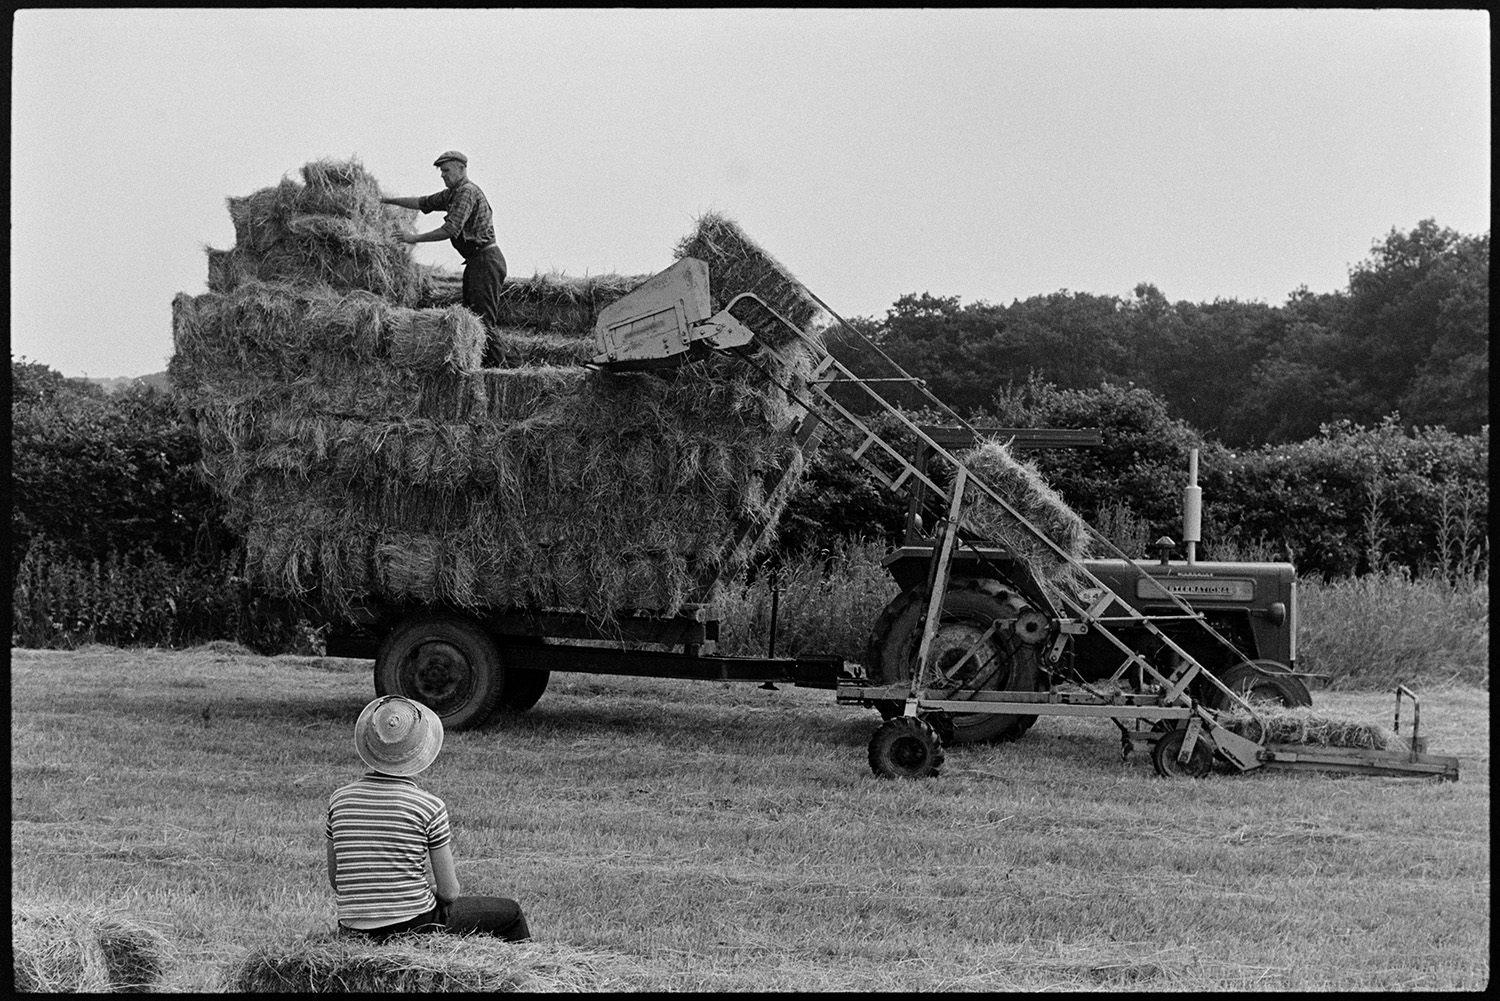 Family haymaking in field. 
[Mr Oke loading hay bales onto a trailer using an elevator in a field at Deckport, Hatherleigh. His son is sat on a hay bale in the field watching him.]